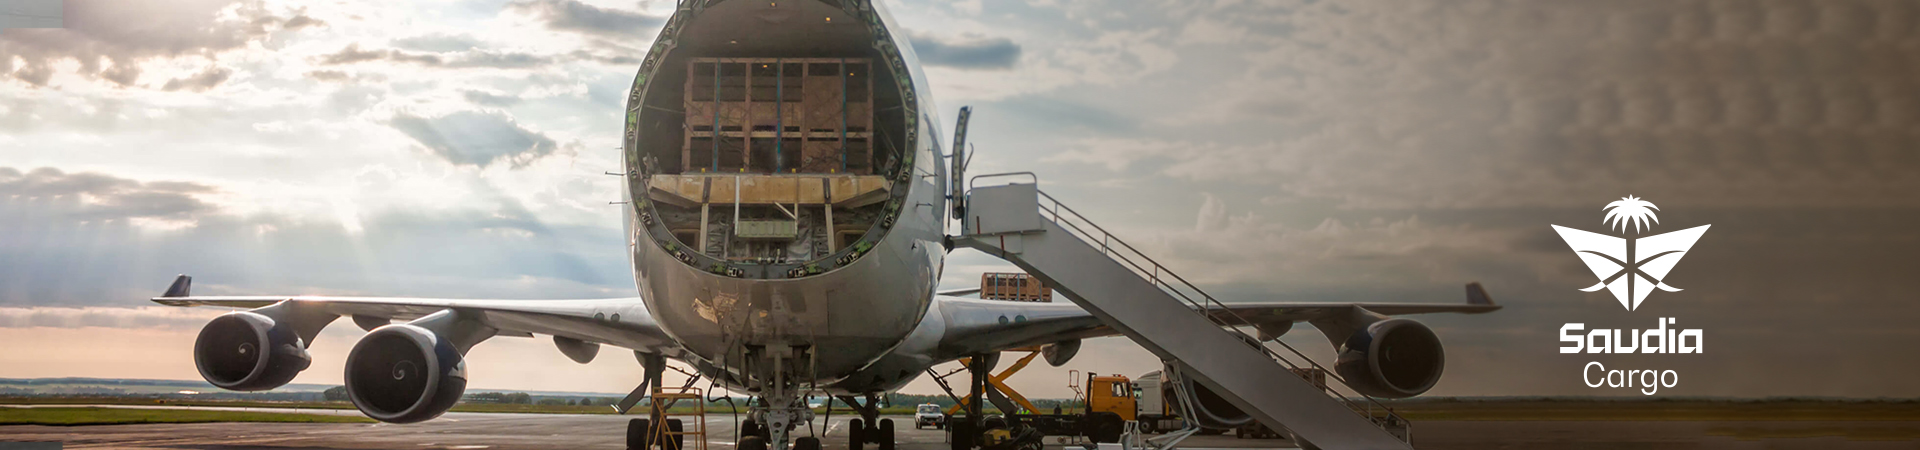 Secure Customer Portal for a Global Air Cargo Carrier Operating Across 800+ Destinations